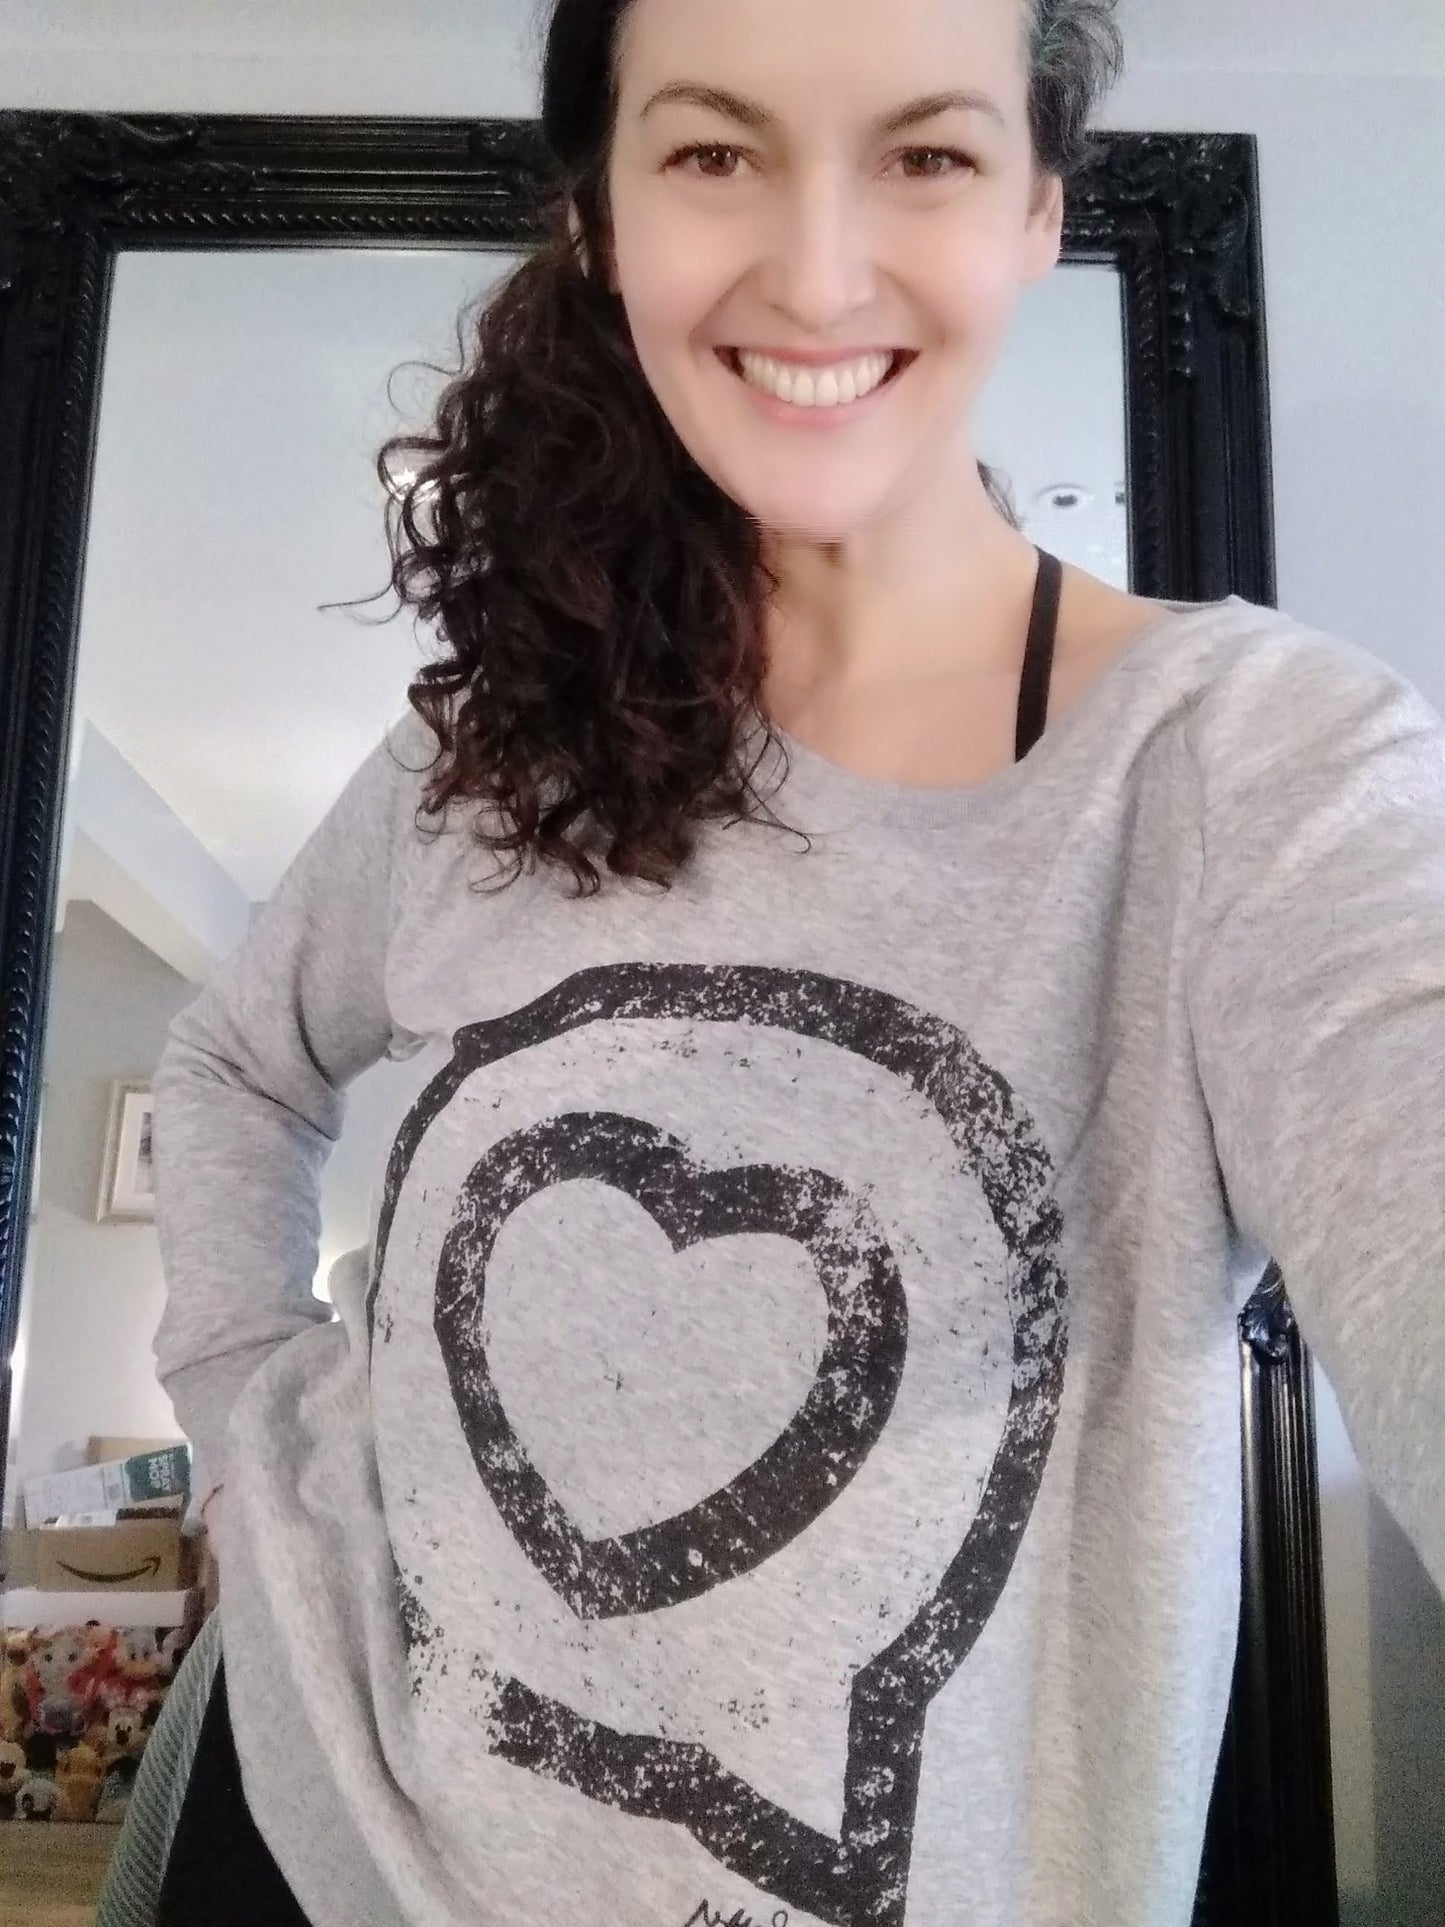 Ruth wears an organic cotton sweatshirt with the Roo Betty logo of a heart in a speech bubble in a vintage style print